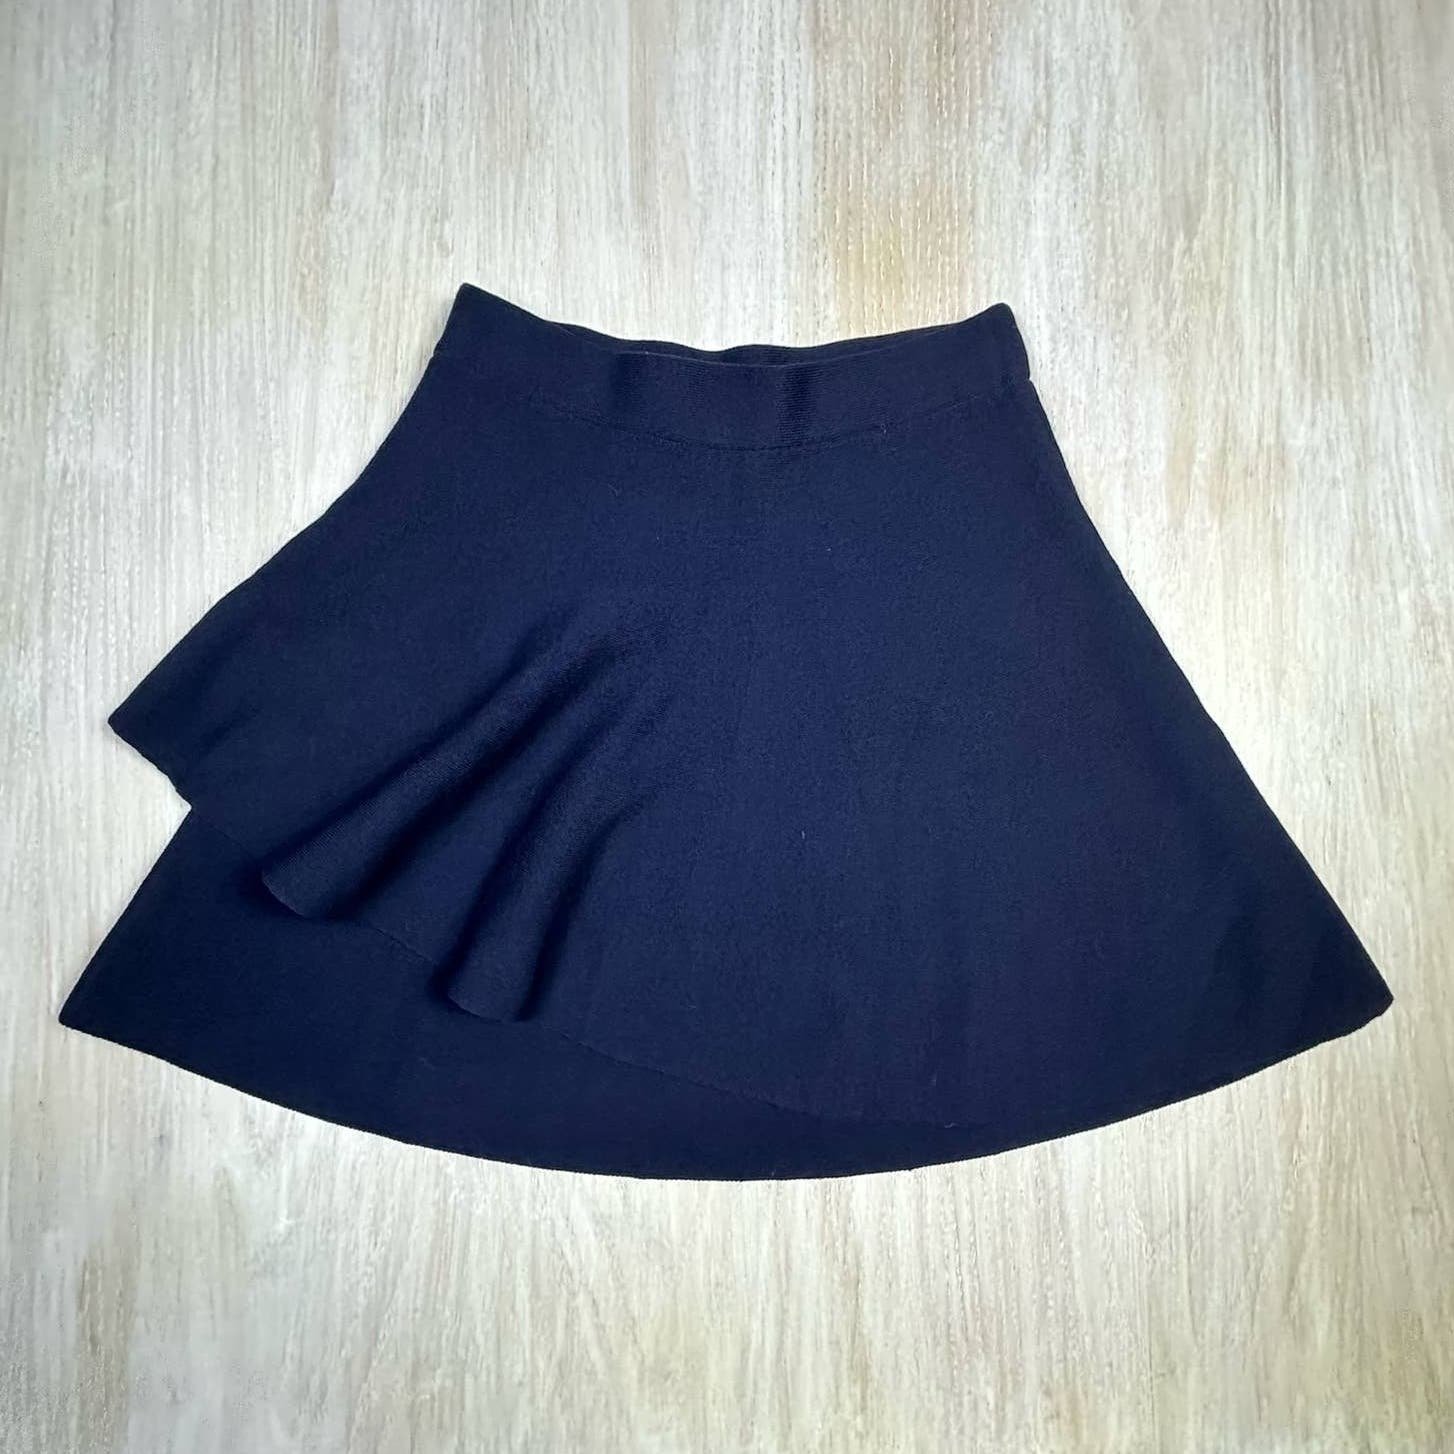 Discounted Zara Basic Navy Tiered Knit Pull On Skirt Si